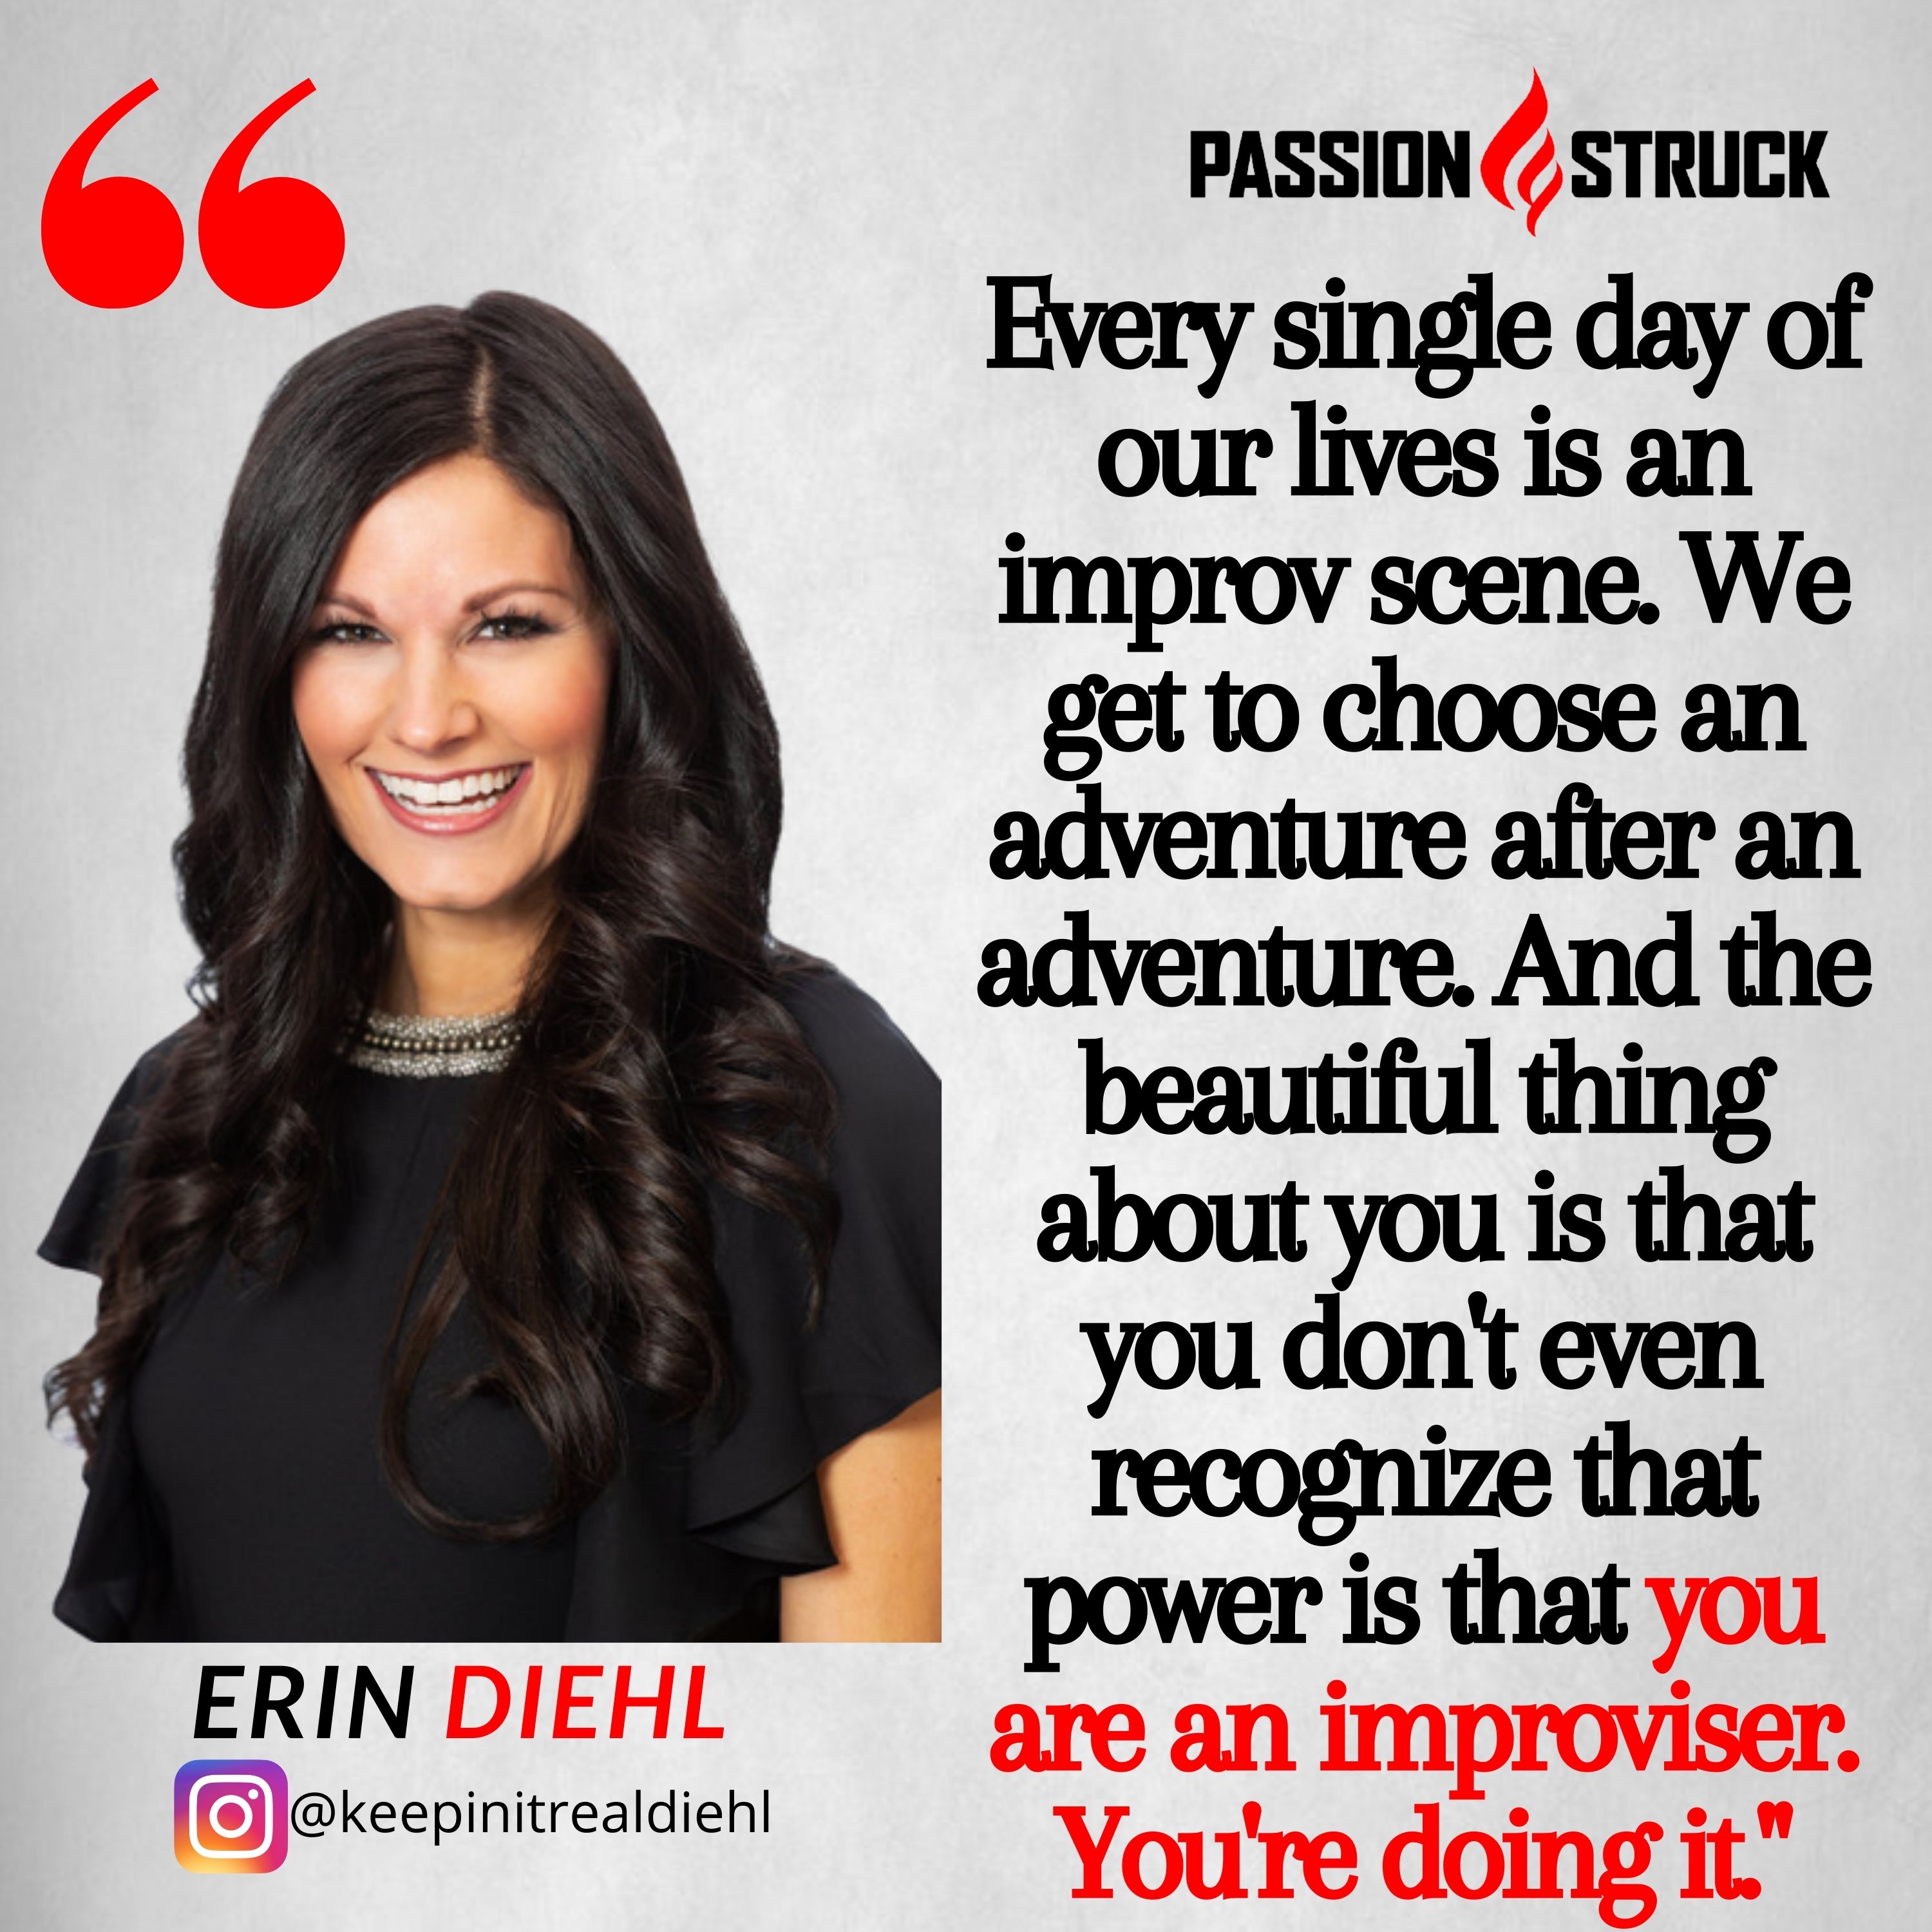 Erin Diehl quote about how every day of our life is an improv scene for passion struck